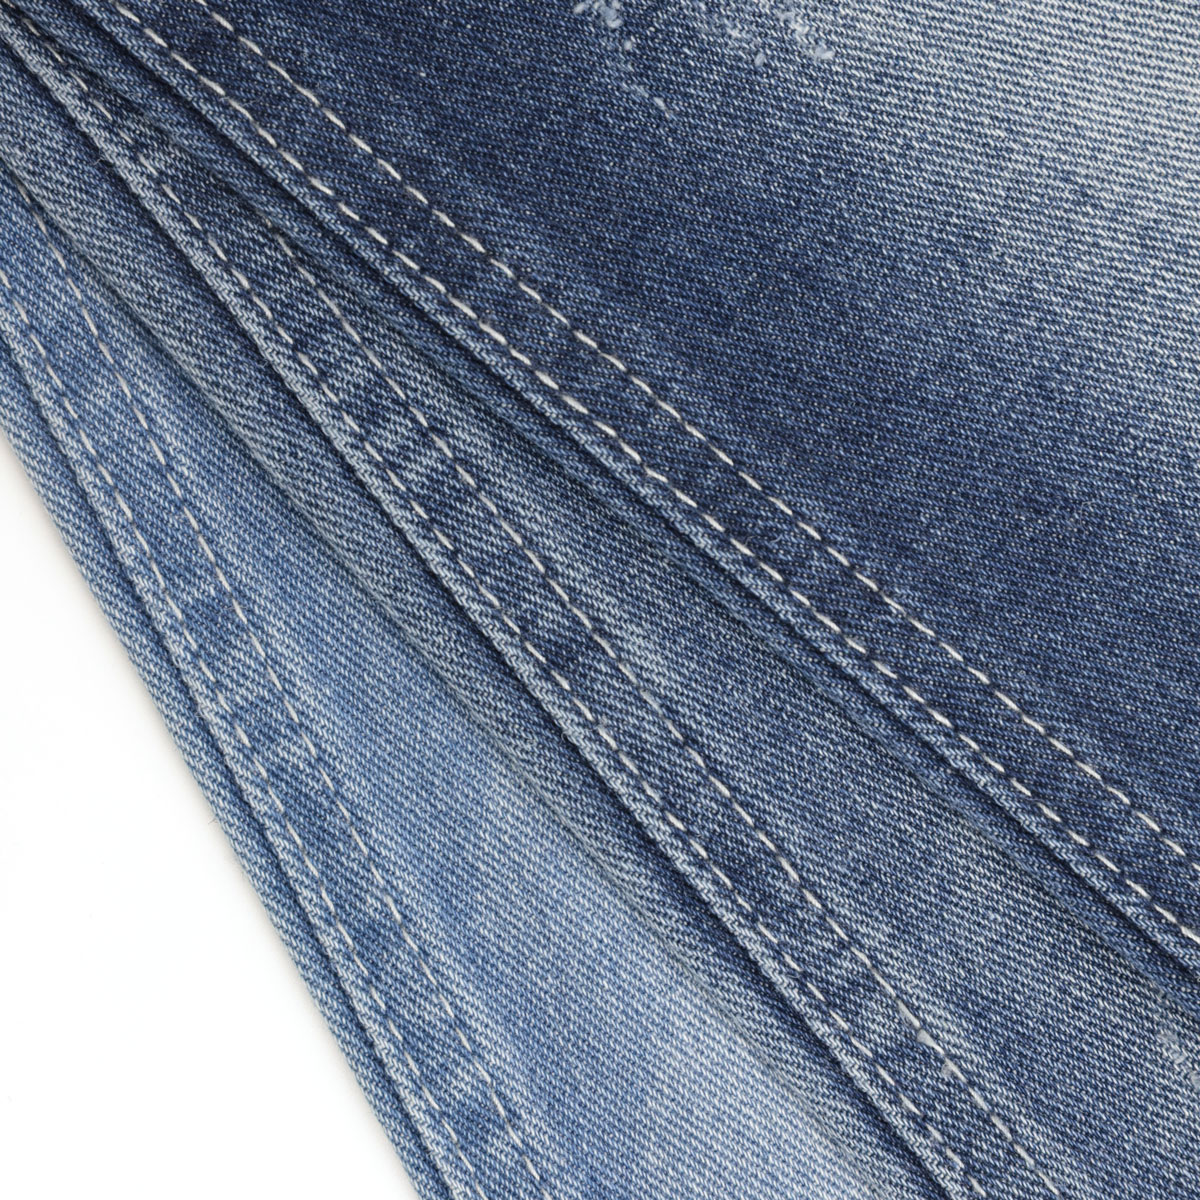 Reasons to Add 4 Way Stretch Denim Fabric to Your Work Today 1